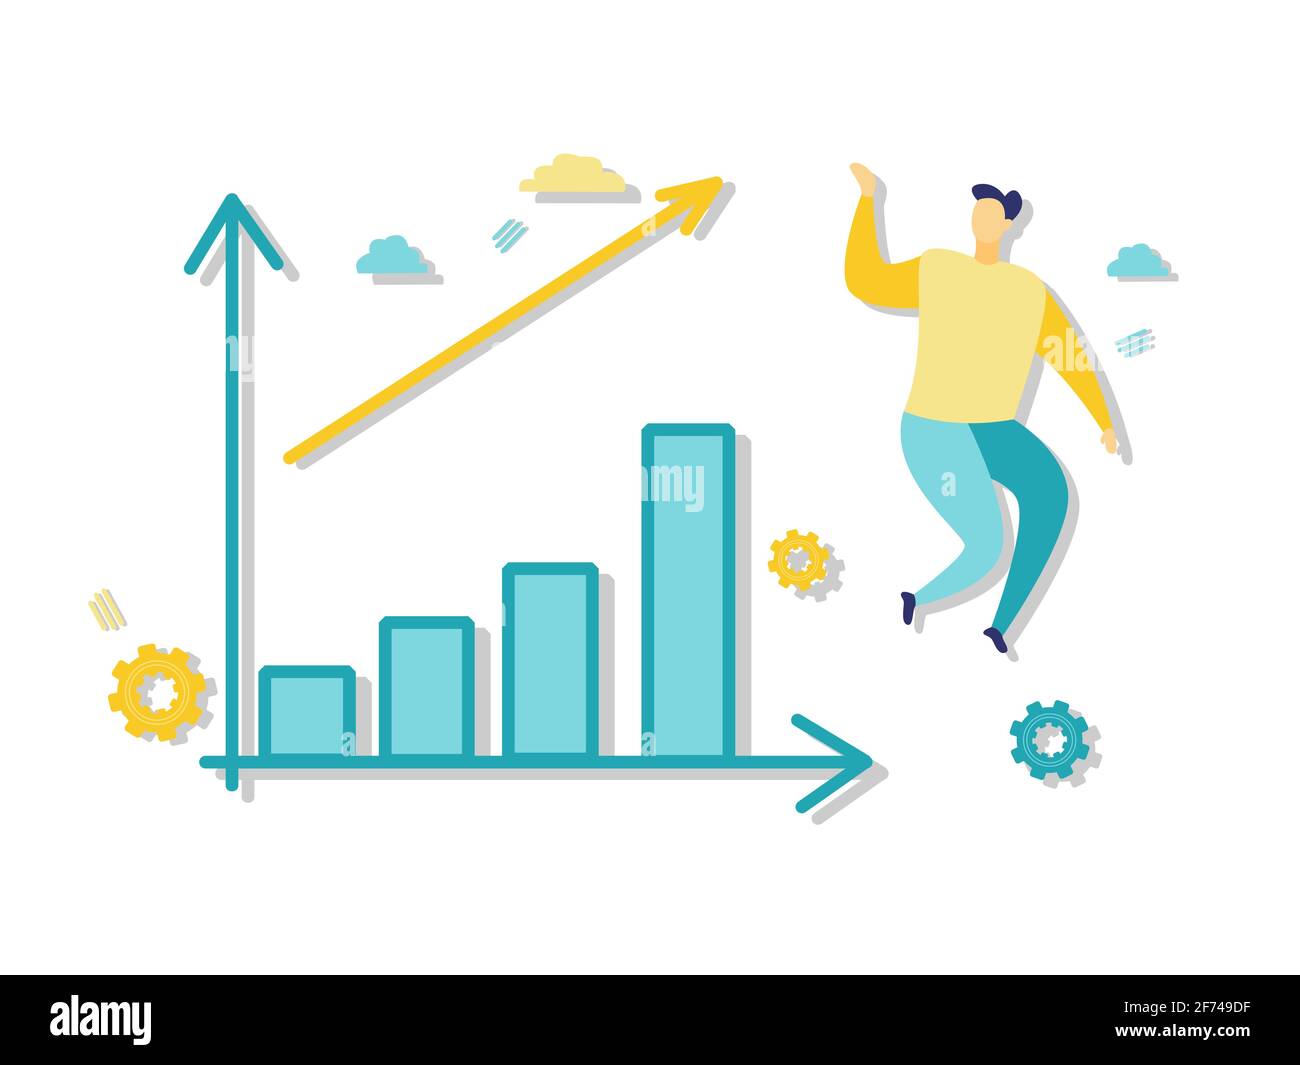 Flat illustration of businessman jumping next to blue chart. Beautiful flat illustration in blue and yellow. Business and finance concepts. Stock Vector